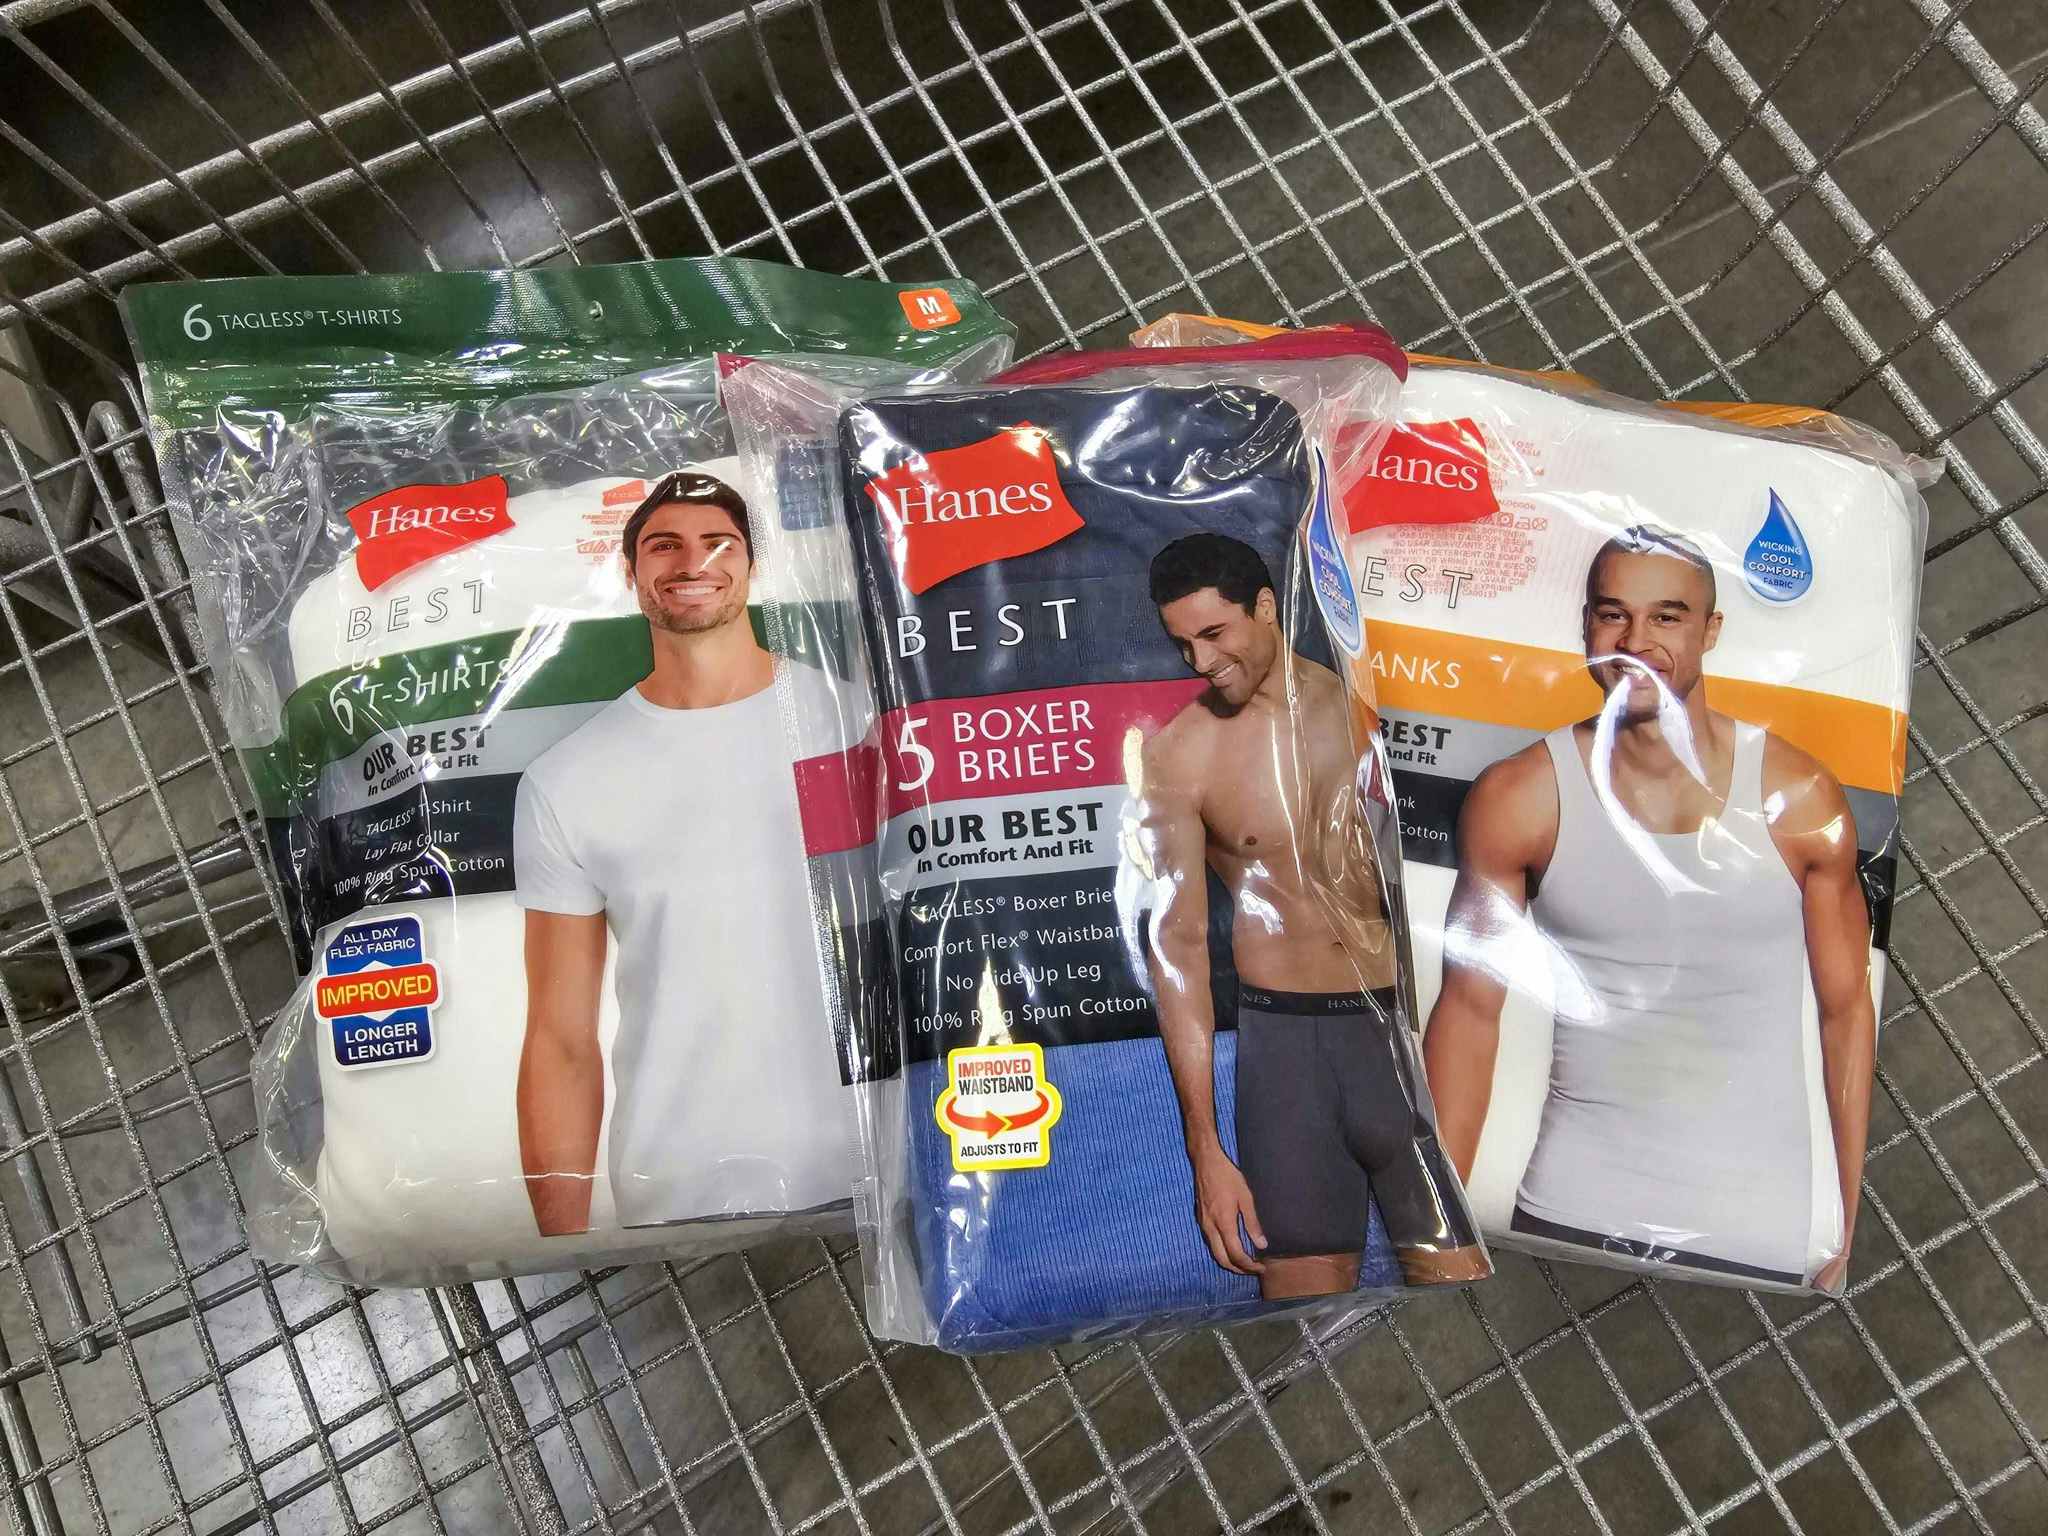 hanes mens shirts and boxer briefs in a cart